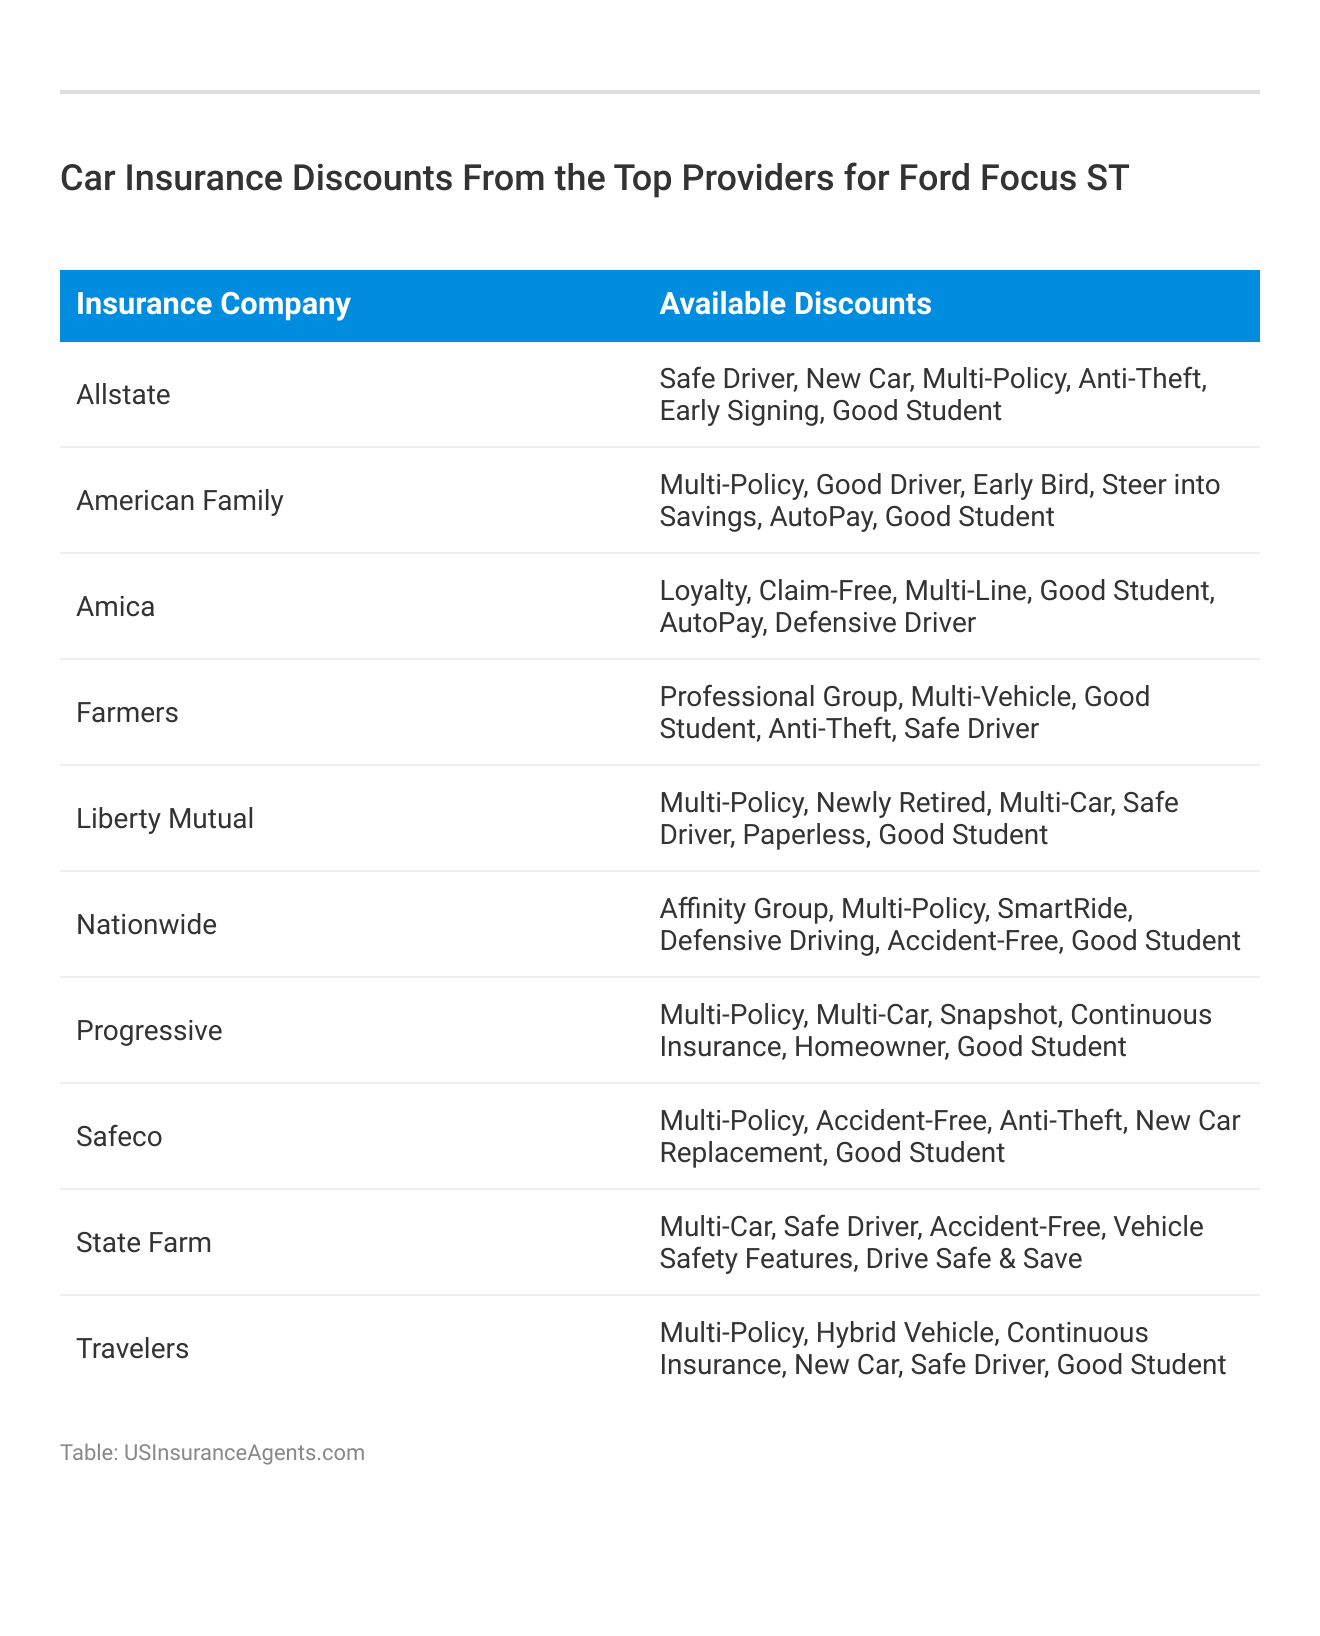 <h3>Car Insurance Discounts From the Top Providers for Ford Focus ST</h3>